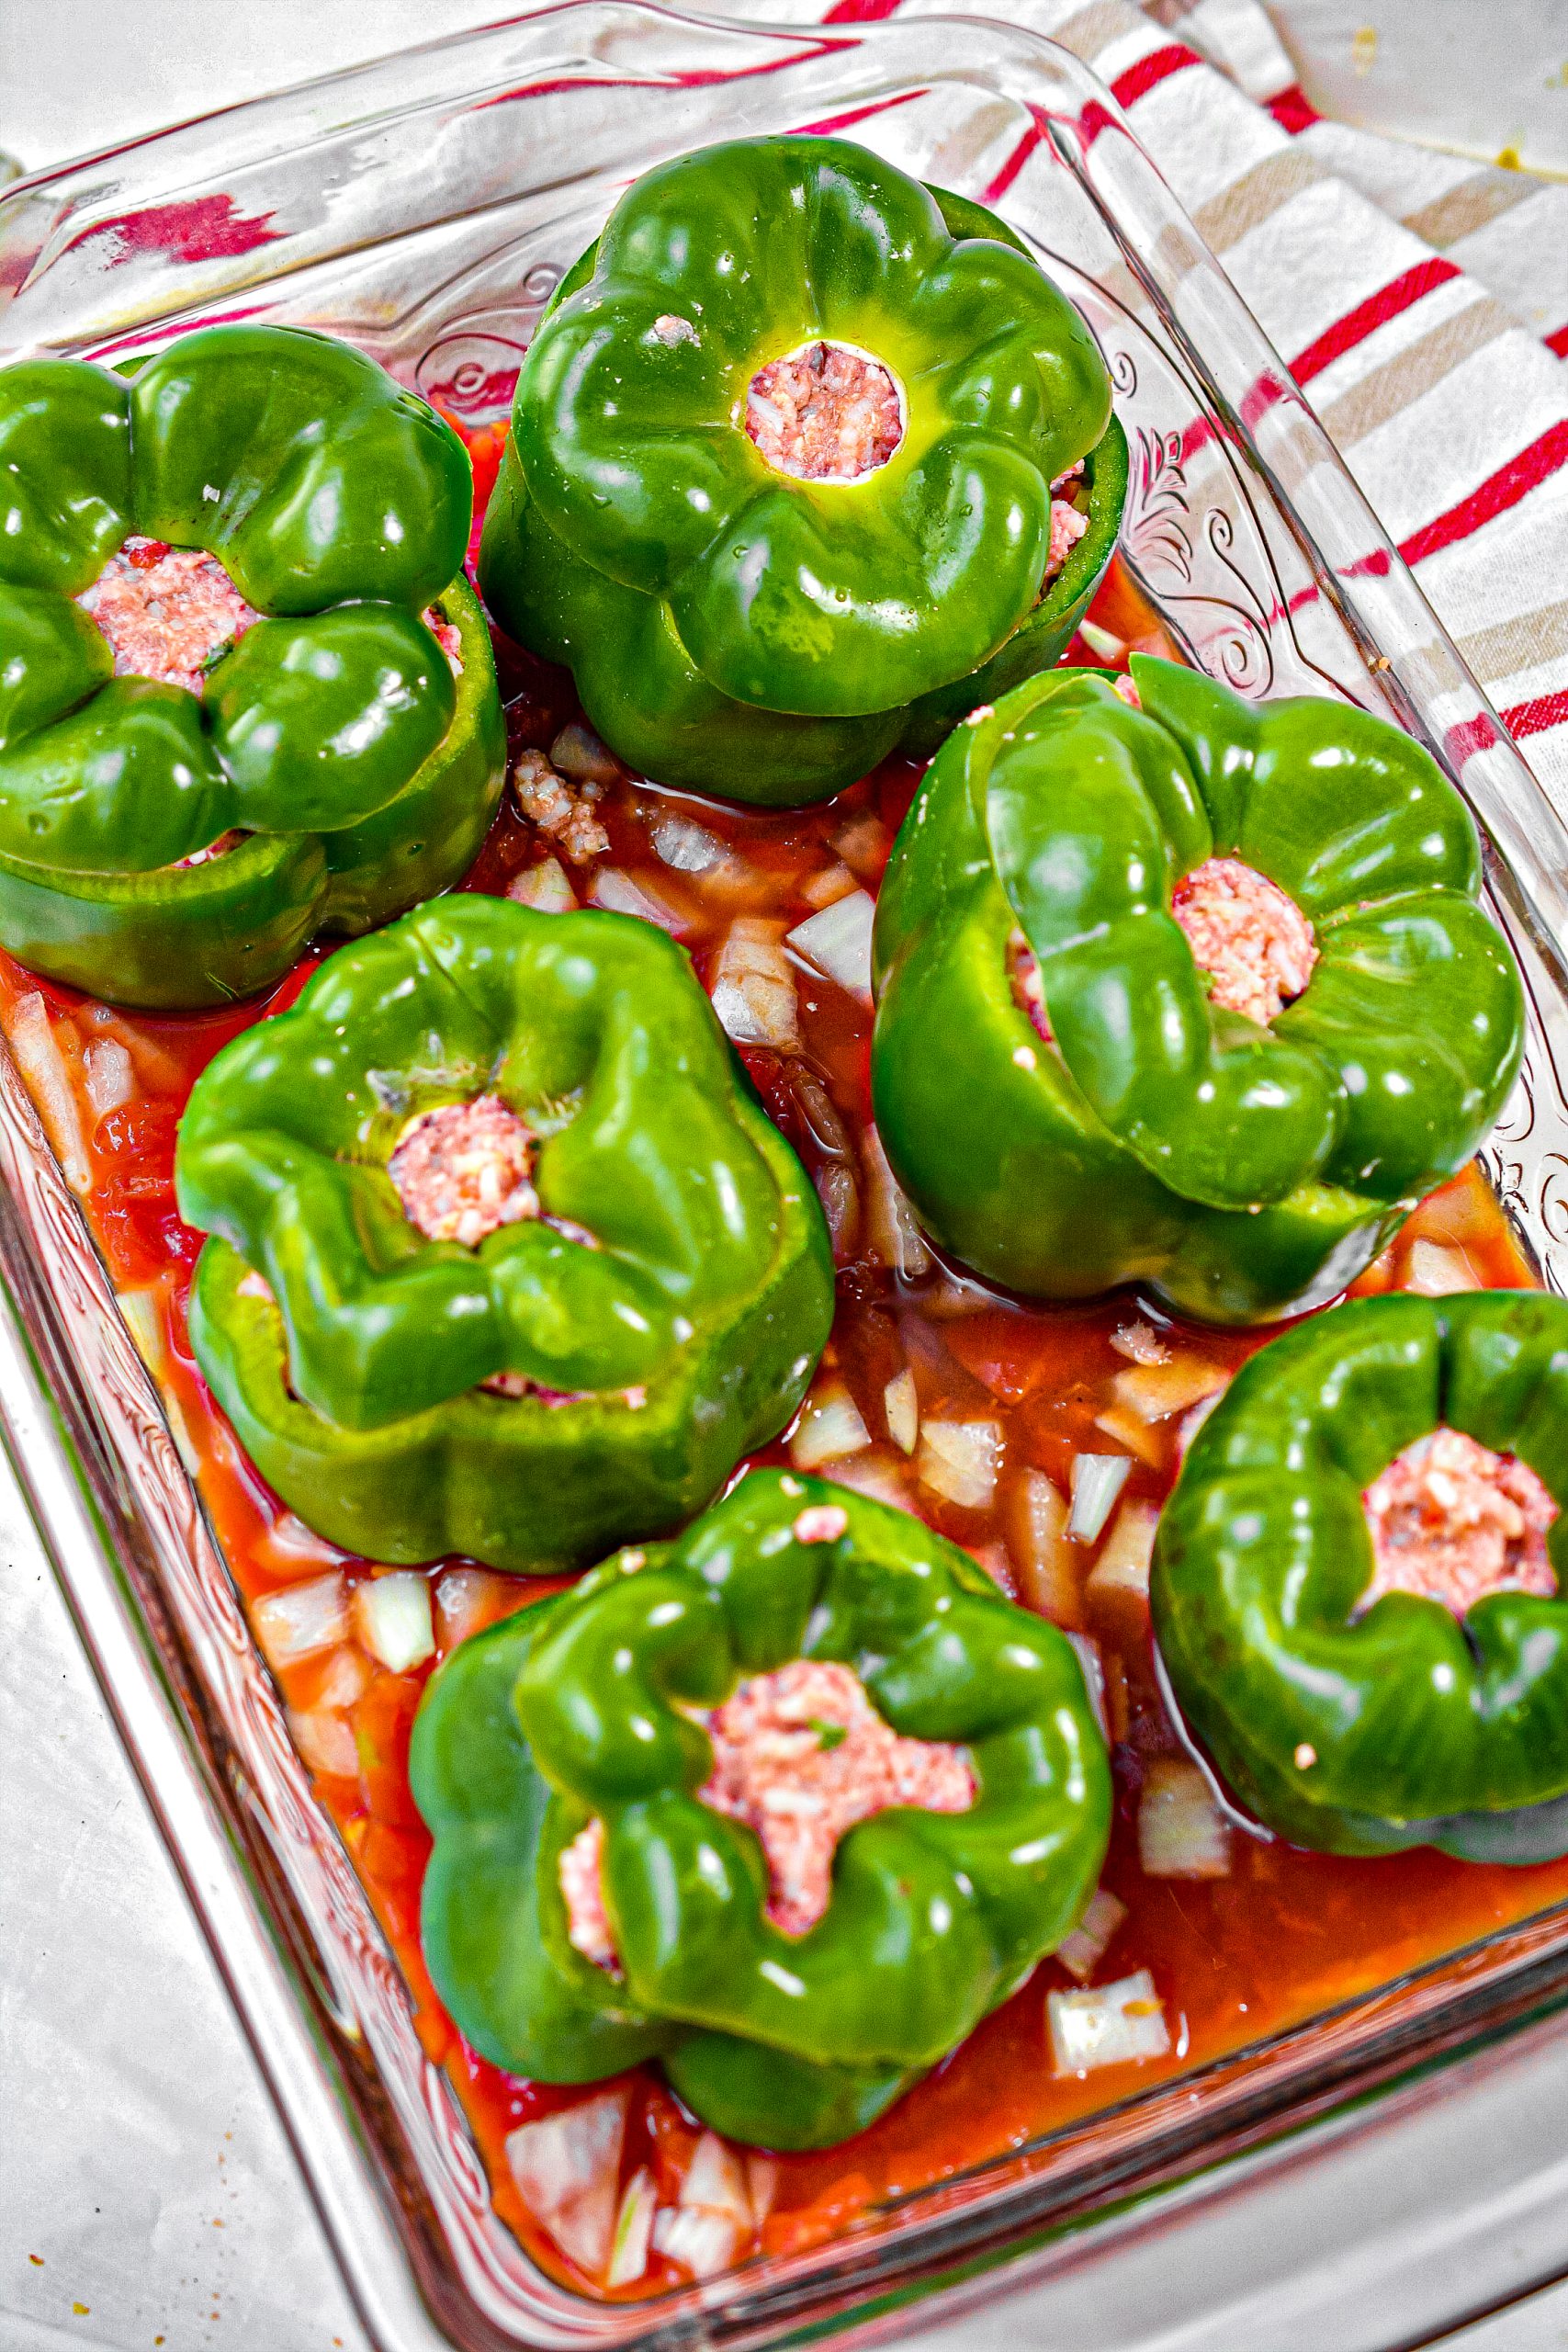 Fill each pepper with a heaping portion of the meat filling and place the tops back on them.